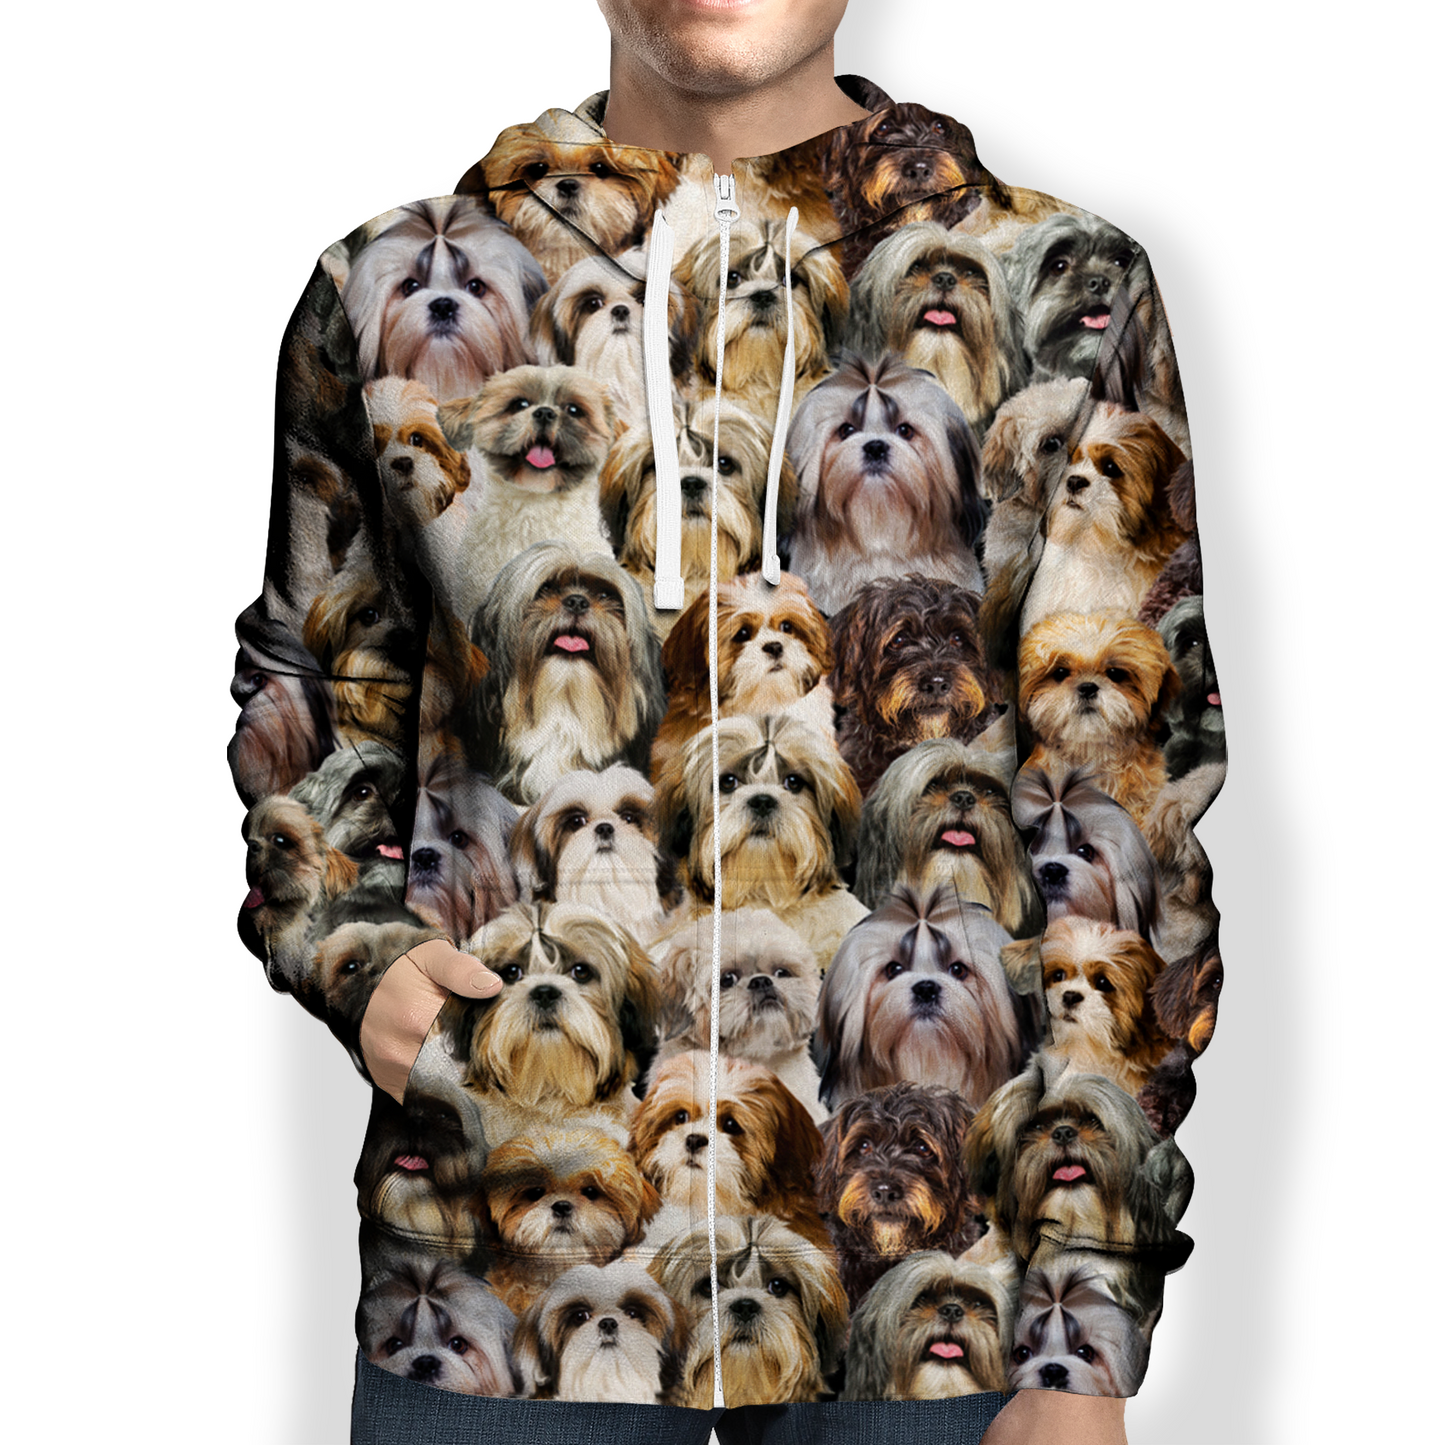 You Will Have A Bunch Of Shih Tzus - Hoodie V1